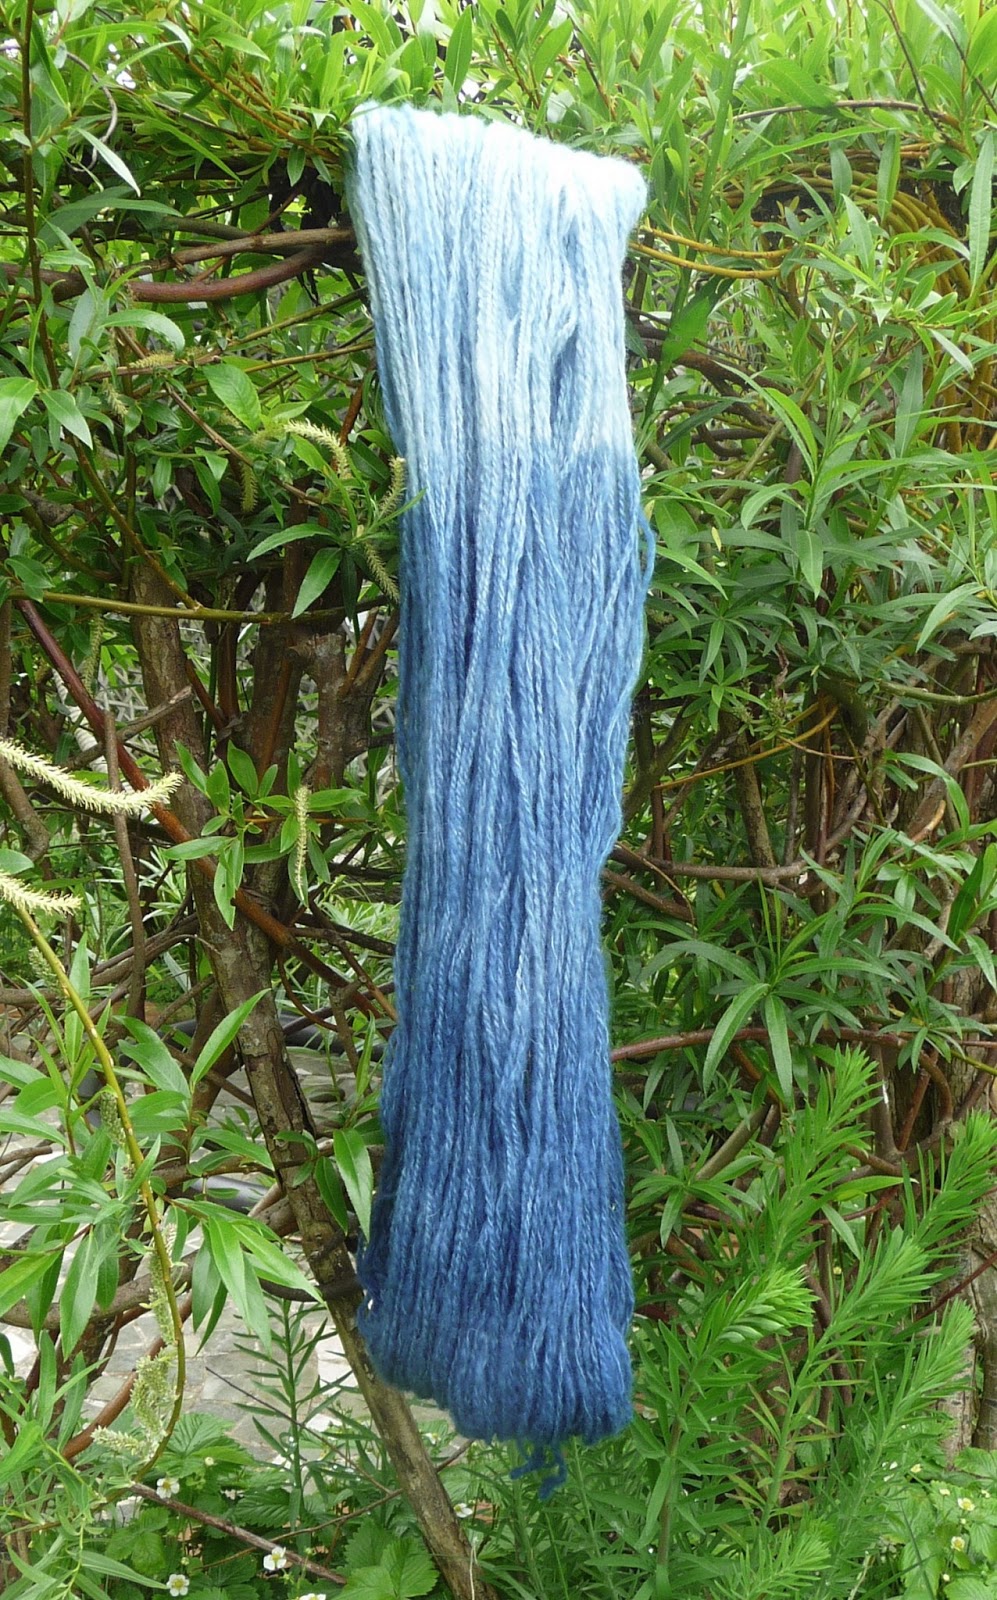 Historical Herbal Dyes for Clothing and Fabric - Wearing Woad